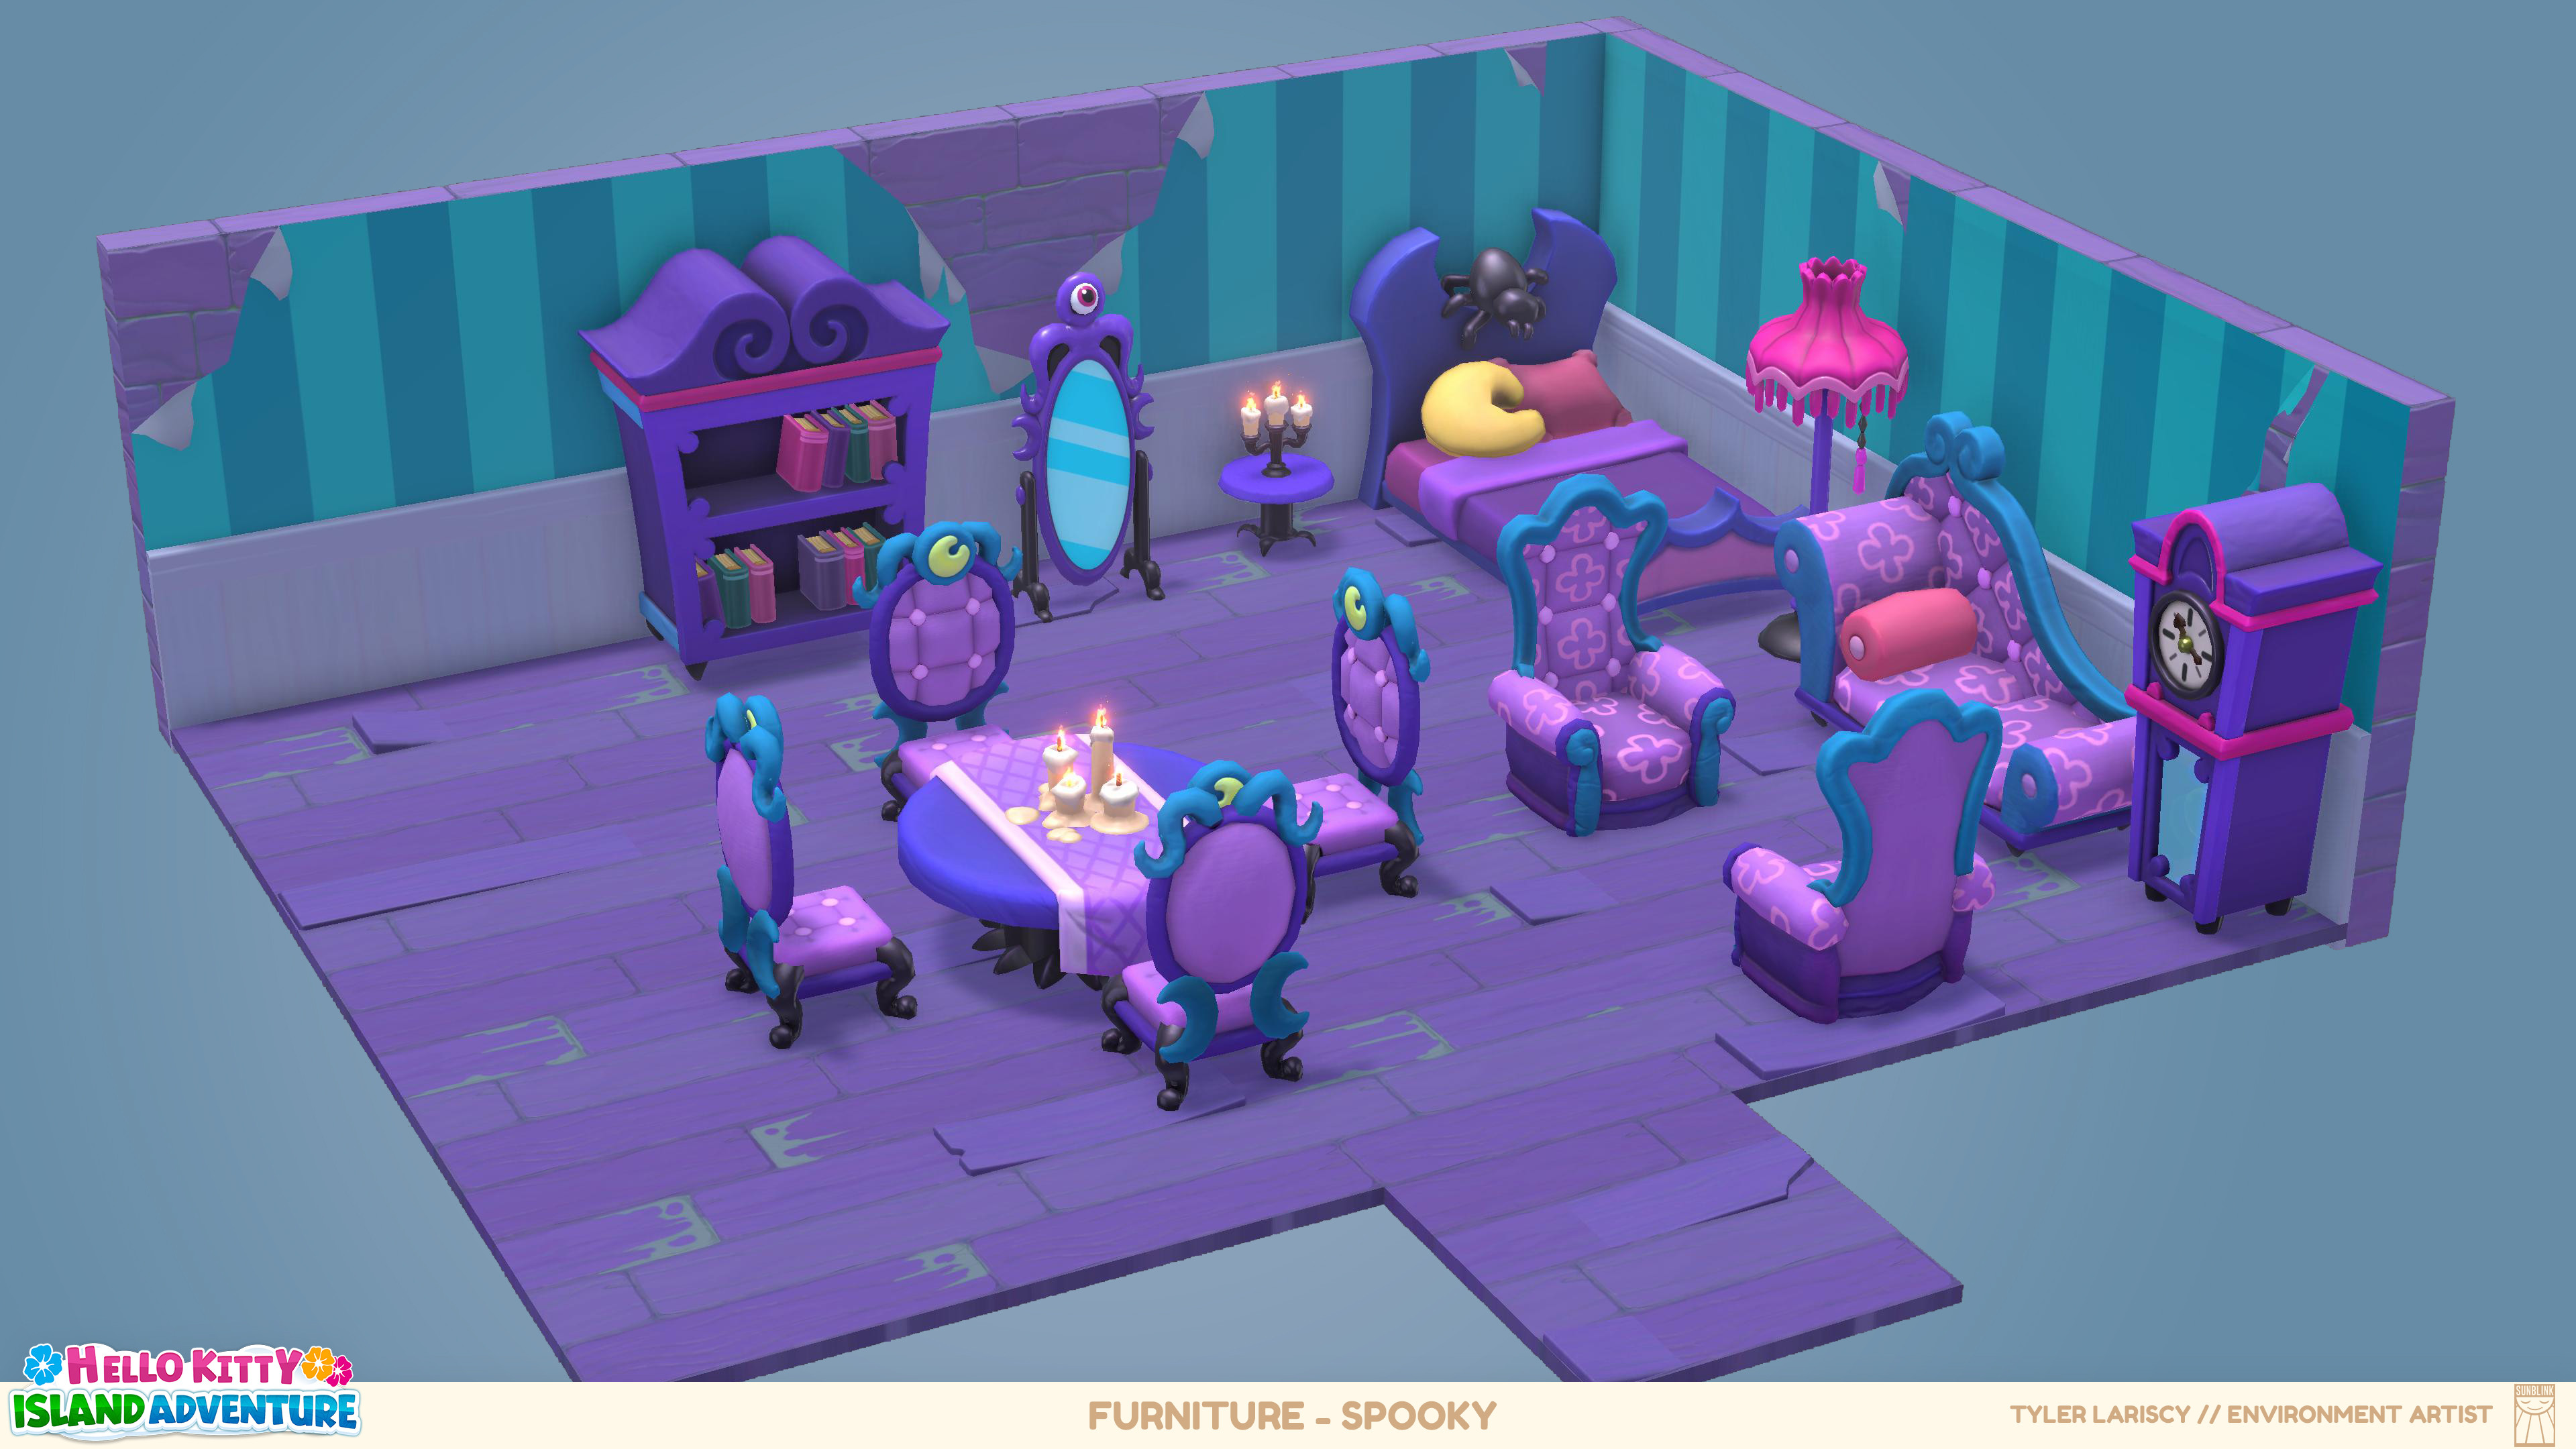 A spooky themed furniture set and room.